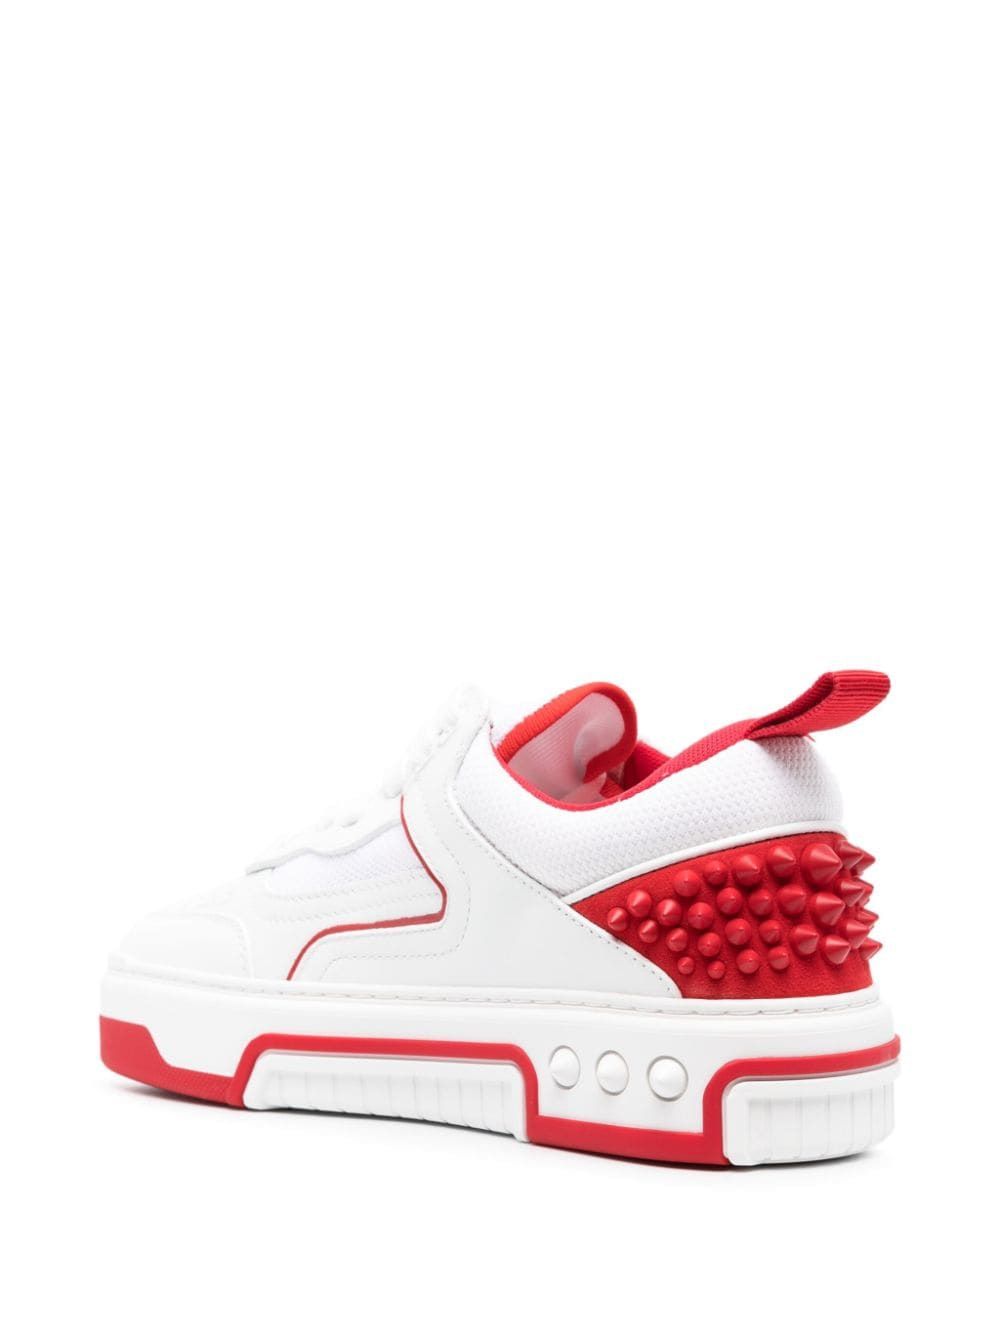 CHRISTIAN LOUBOUTIN White Leather Sneaker with Spikes and CL Monogram for Women